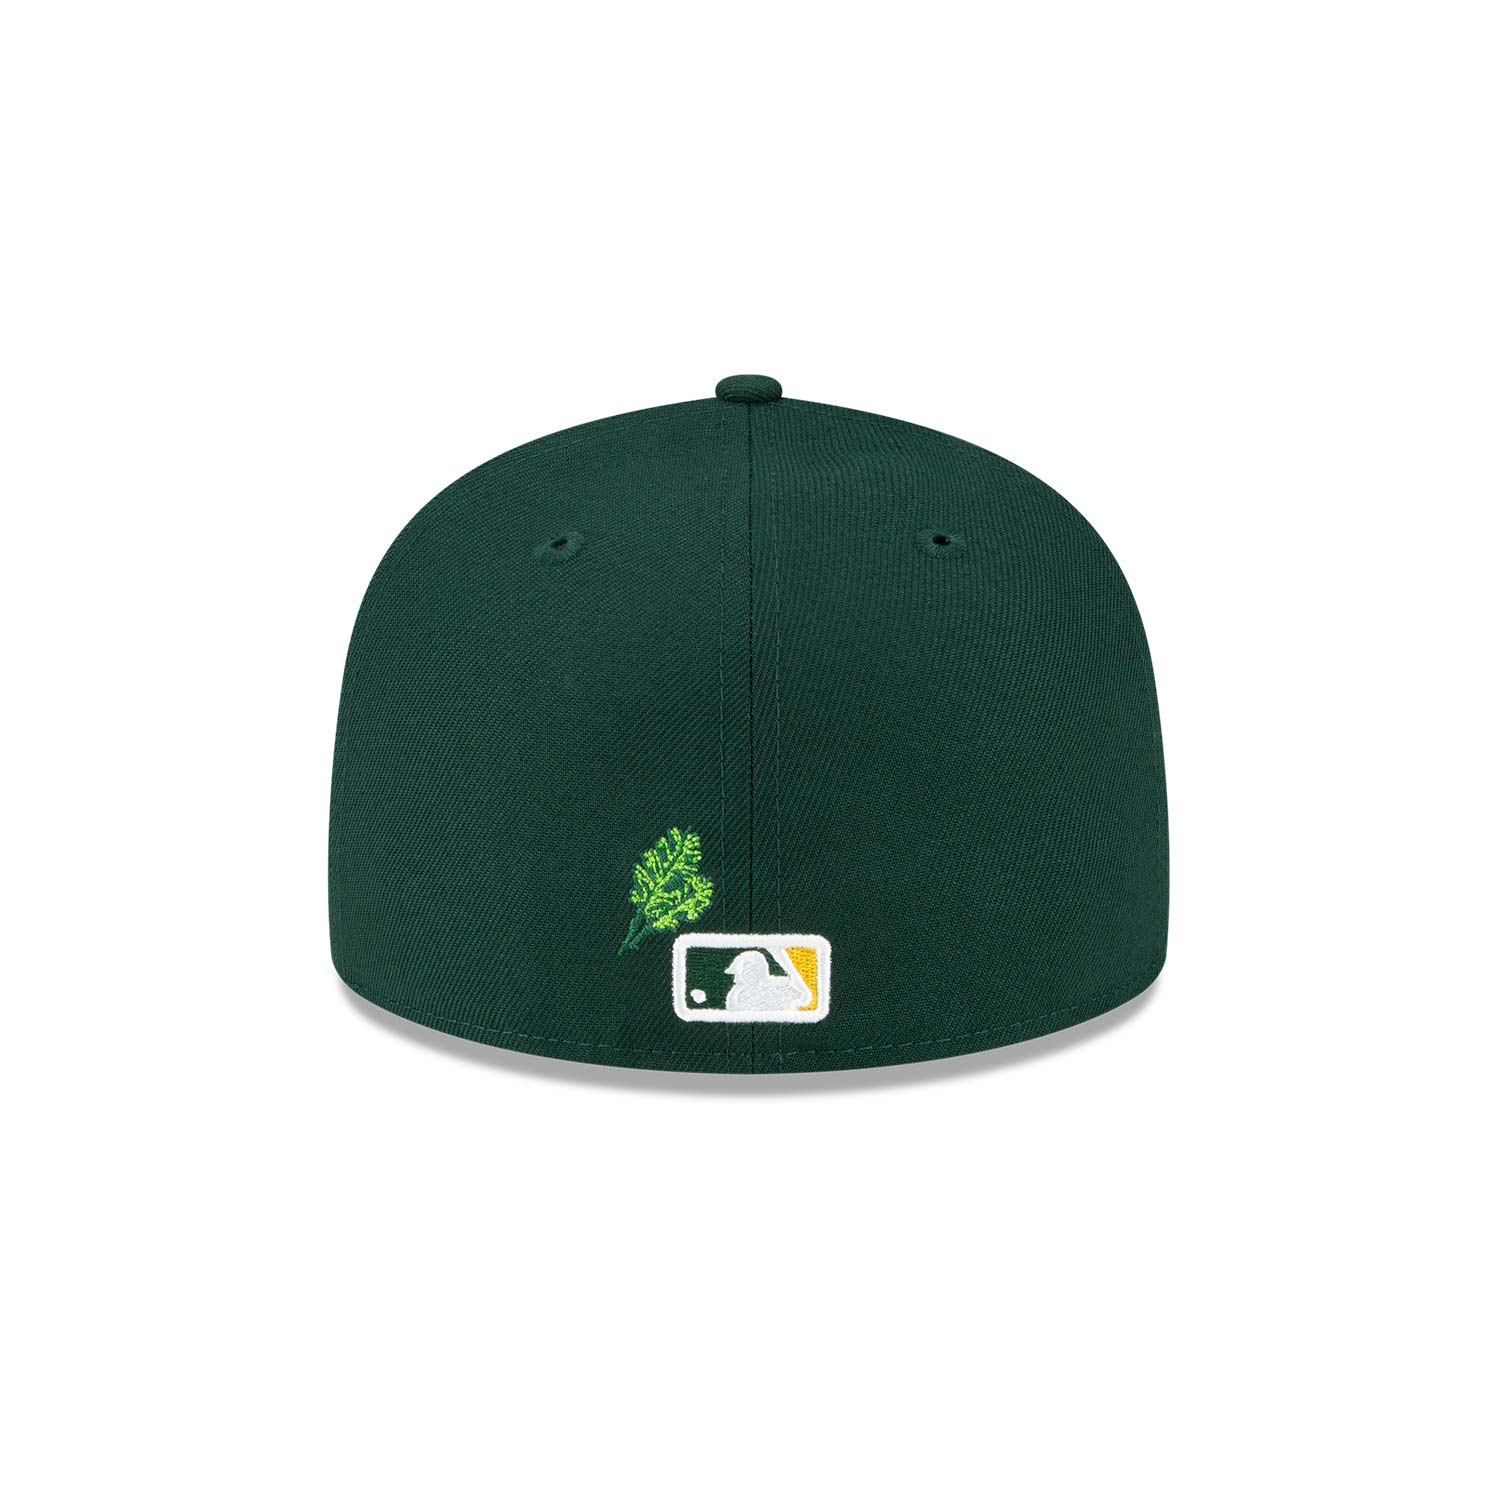 Oakland Athletics Stateview Dark Green 59FIFTY Fitted Cap